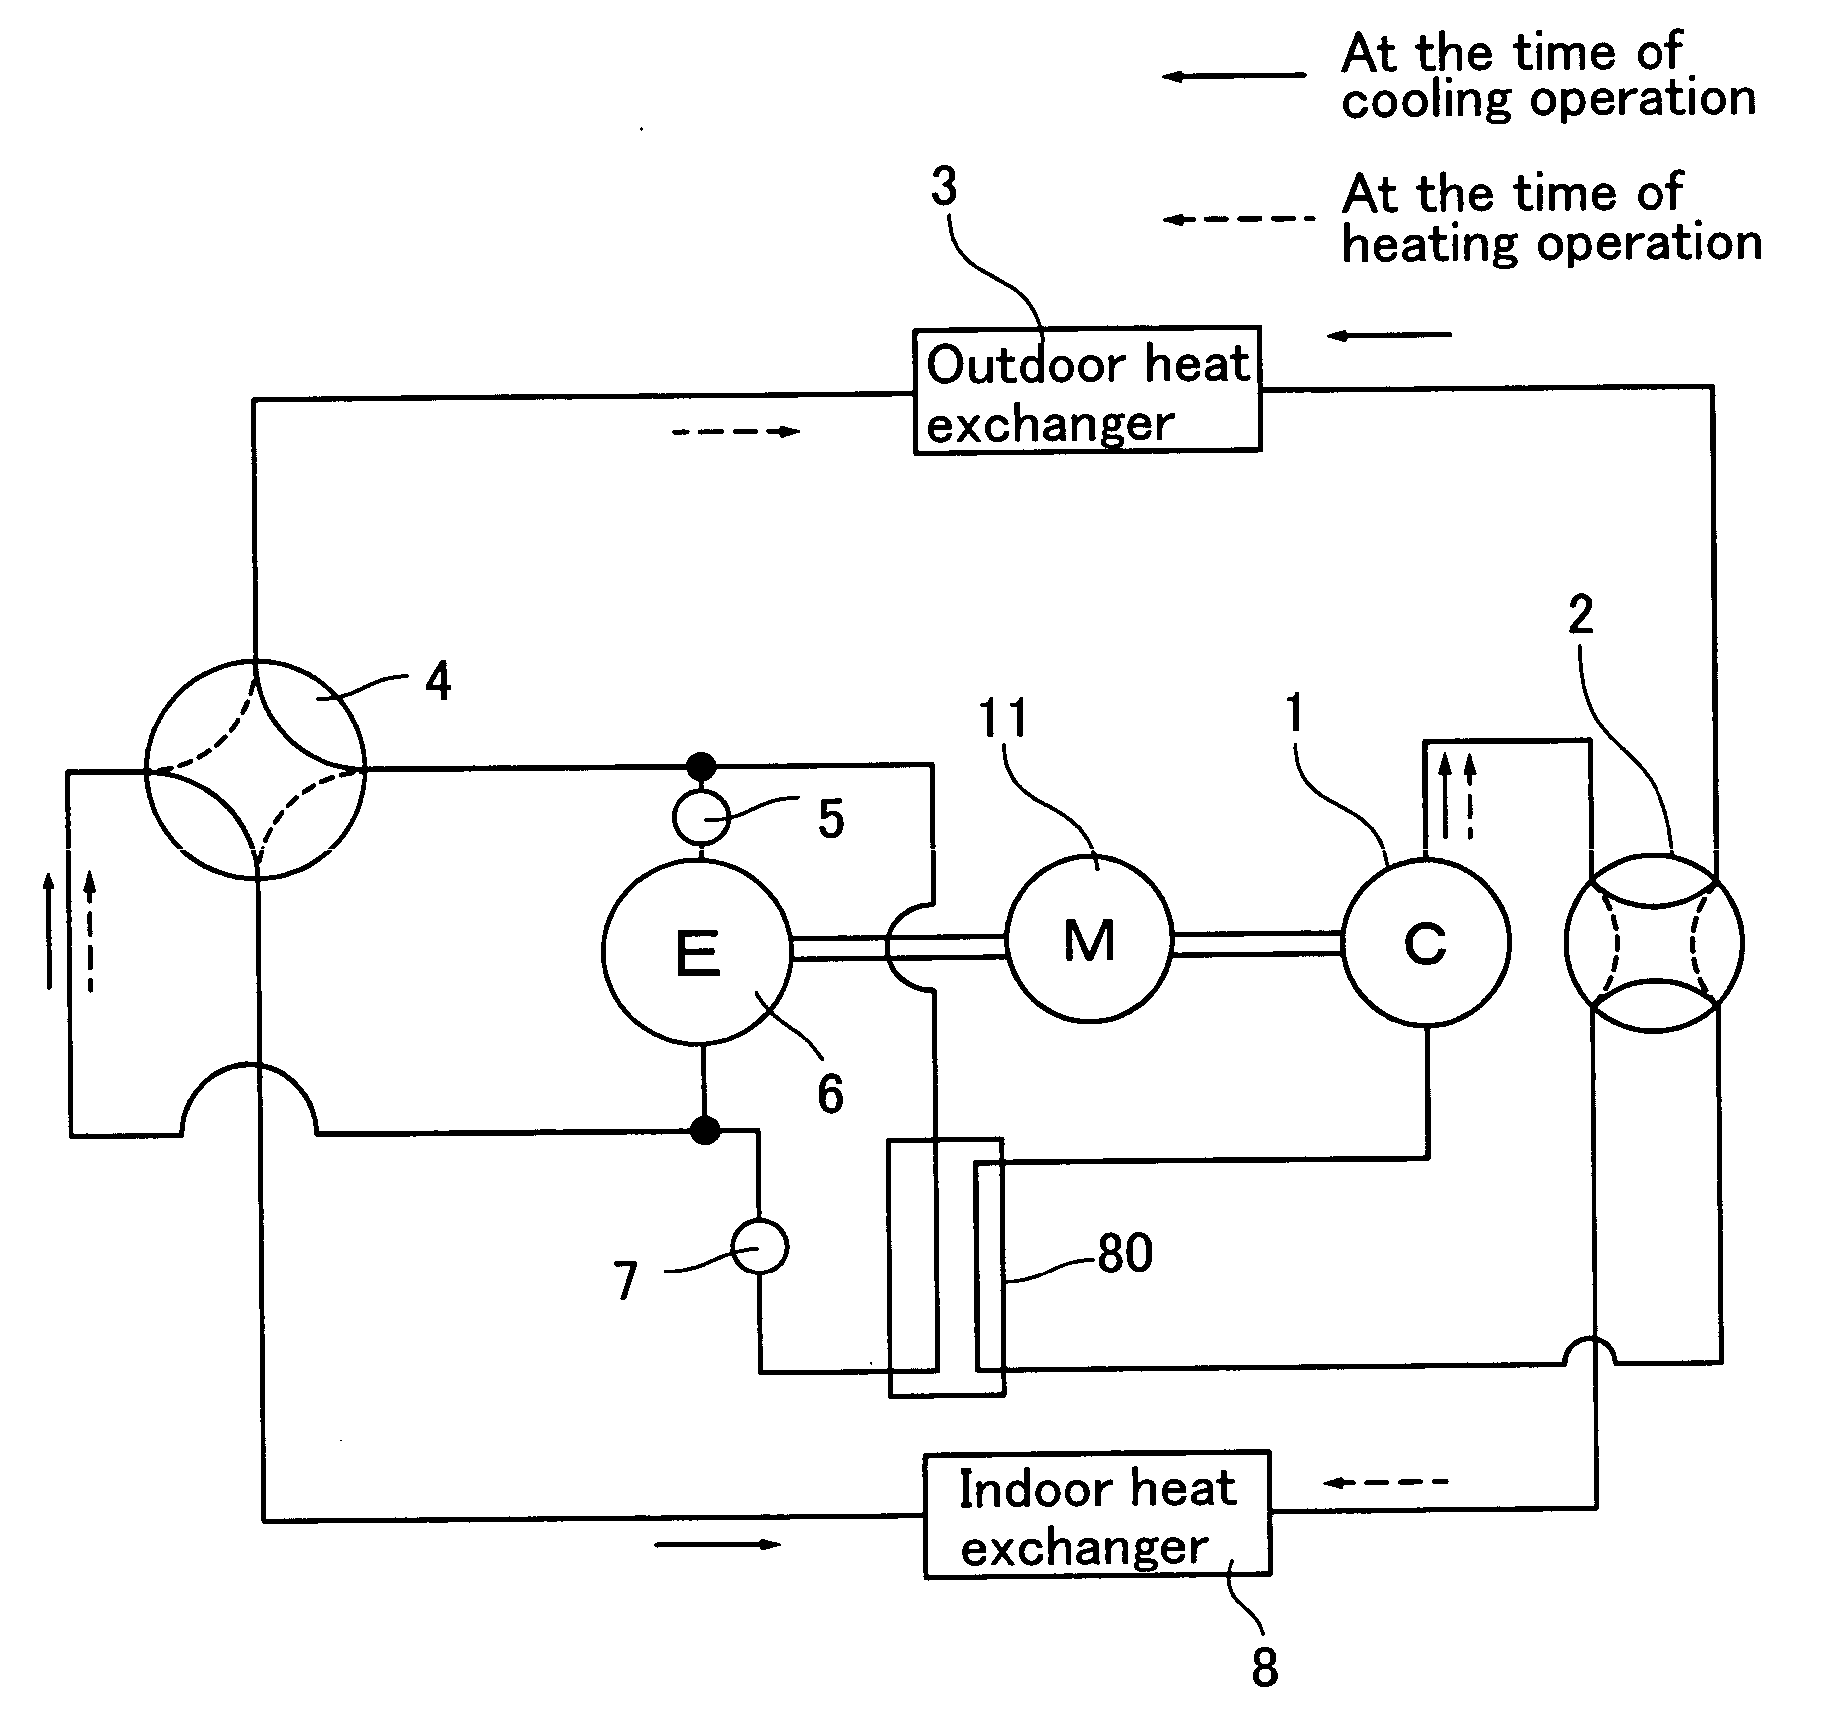 Determining method of high pressure of refrigeration cycle apparatus